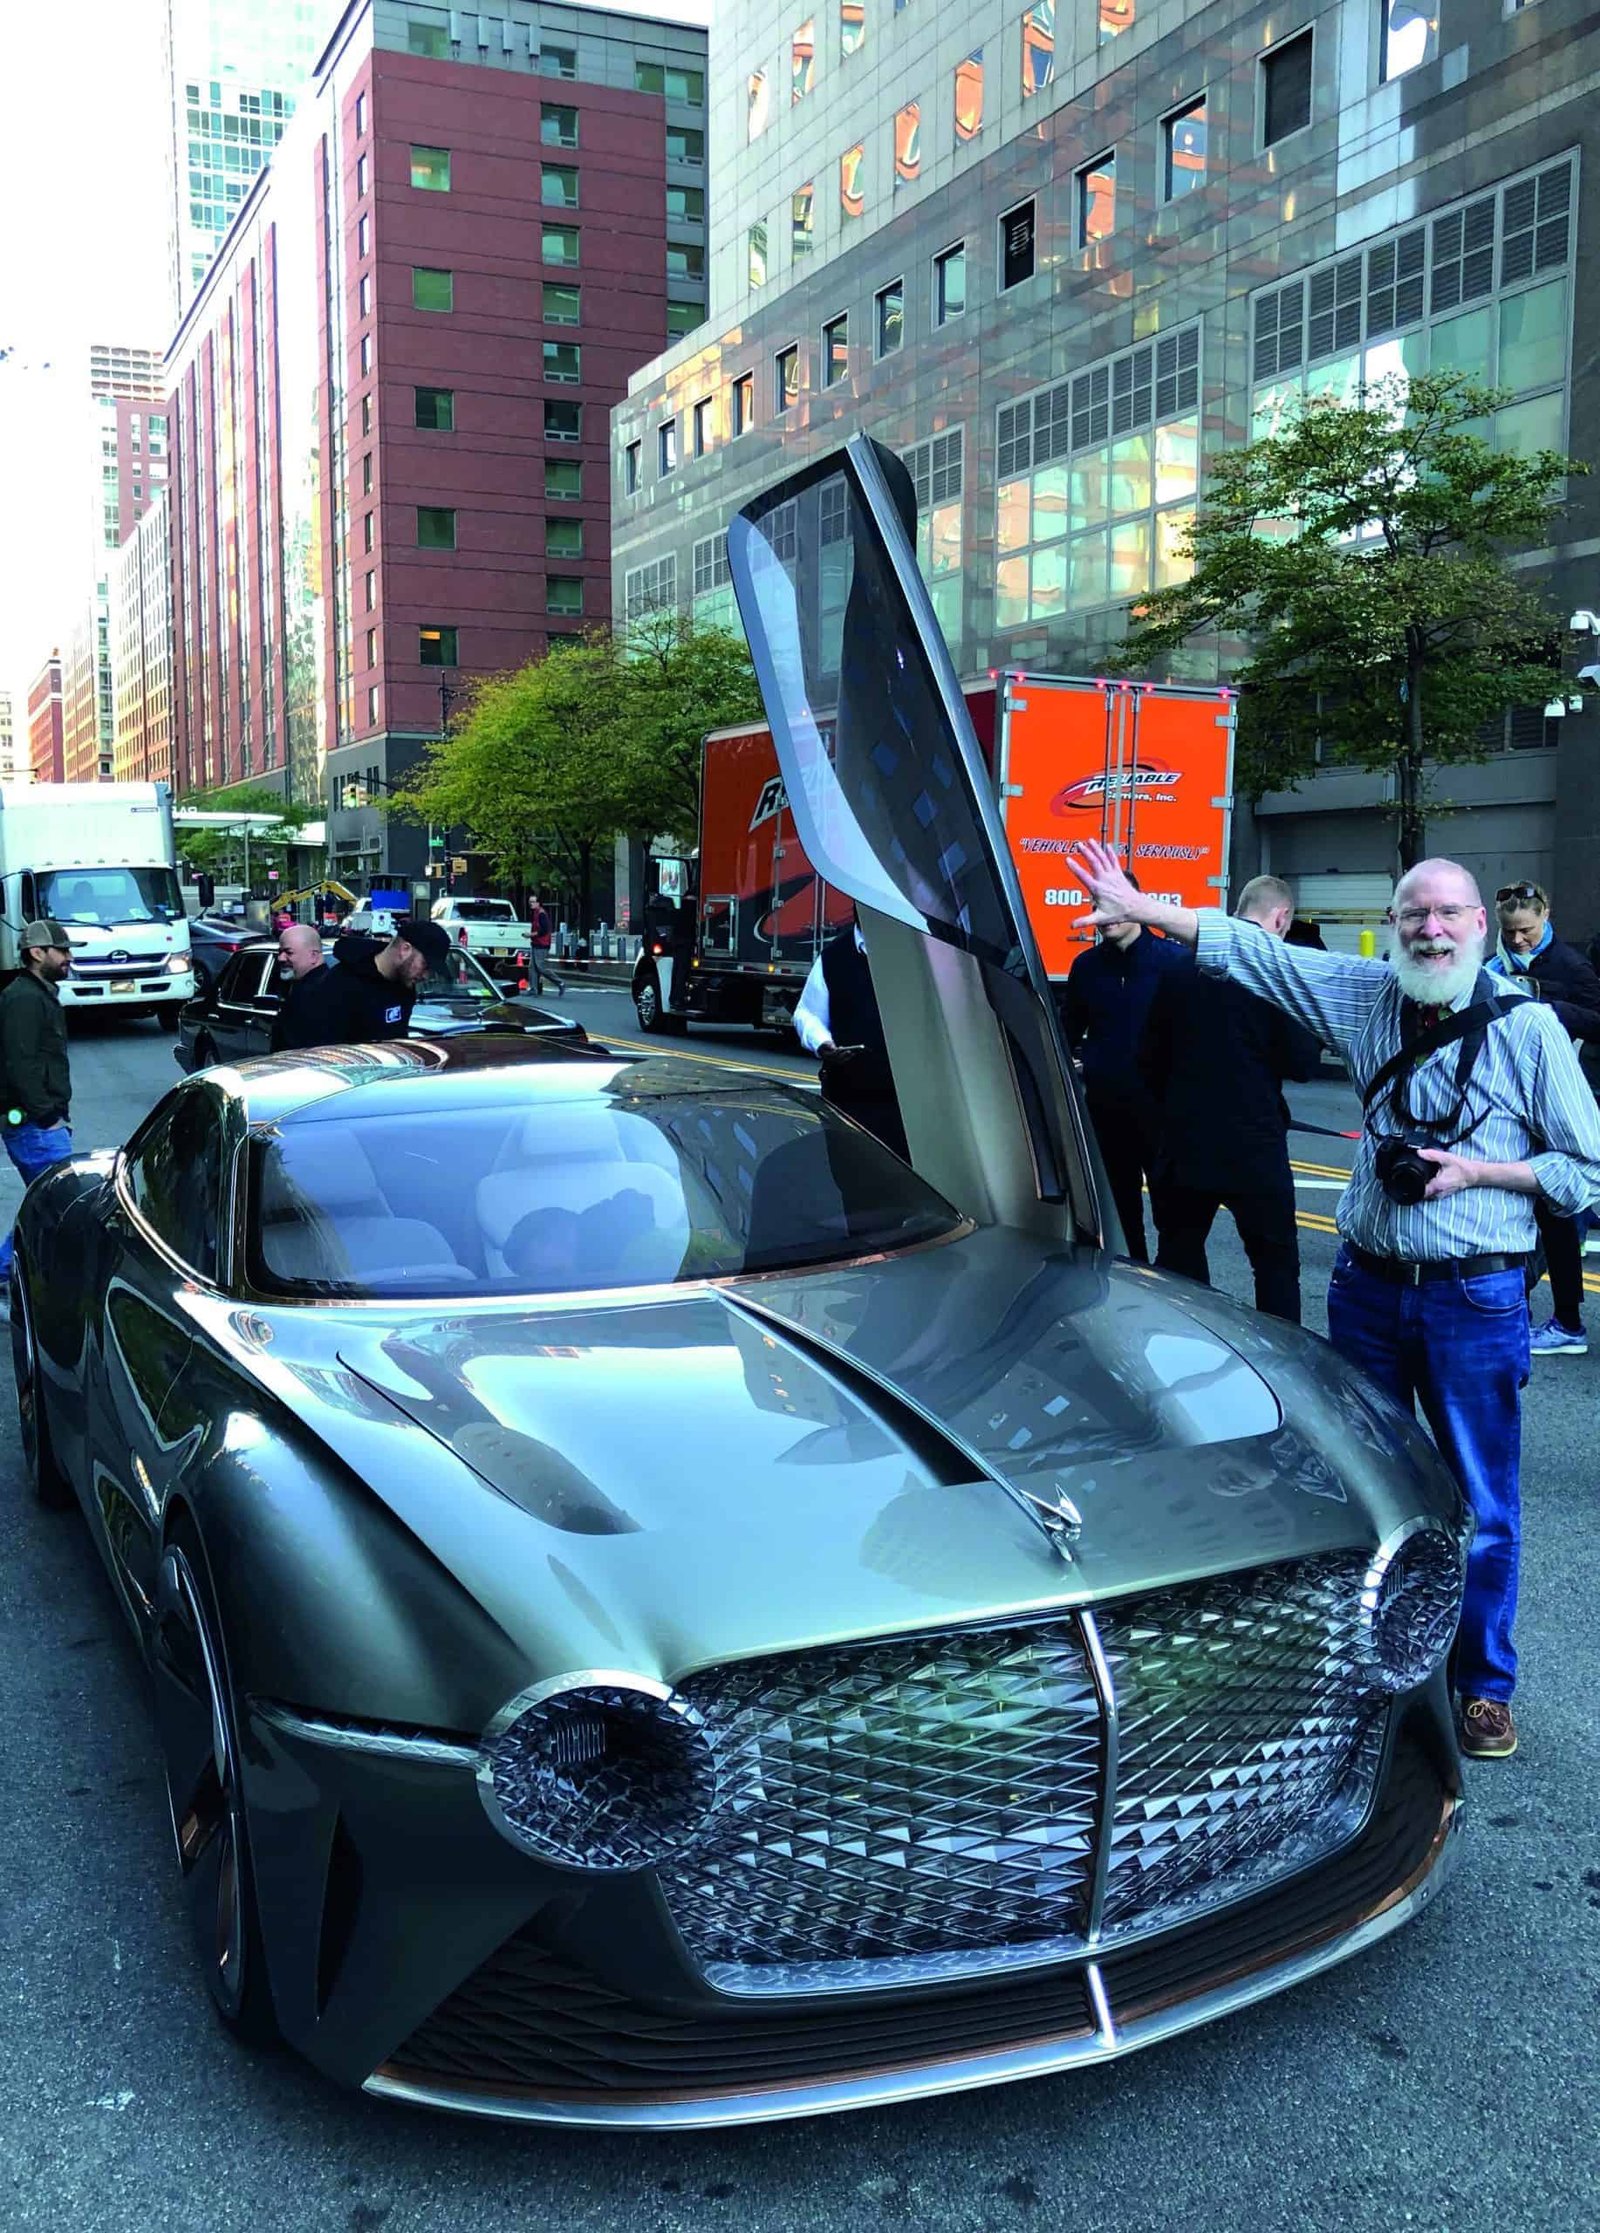 A man is standing next to a futuristic car invention.